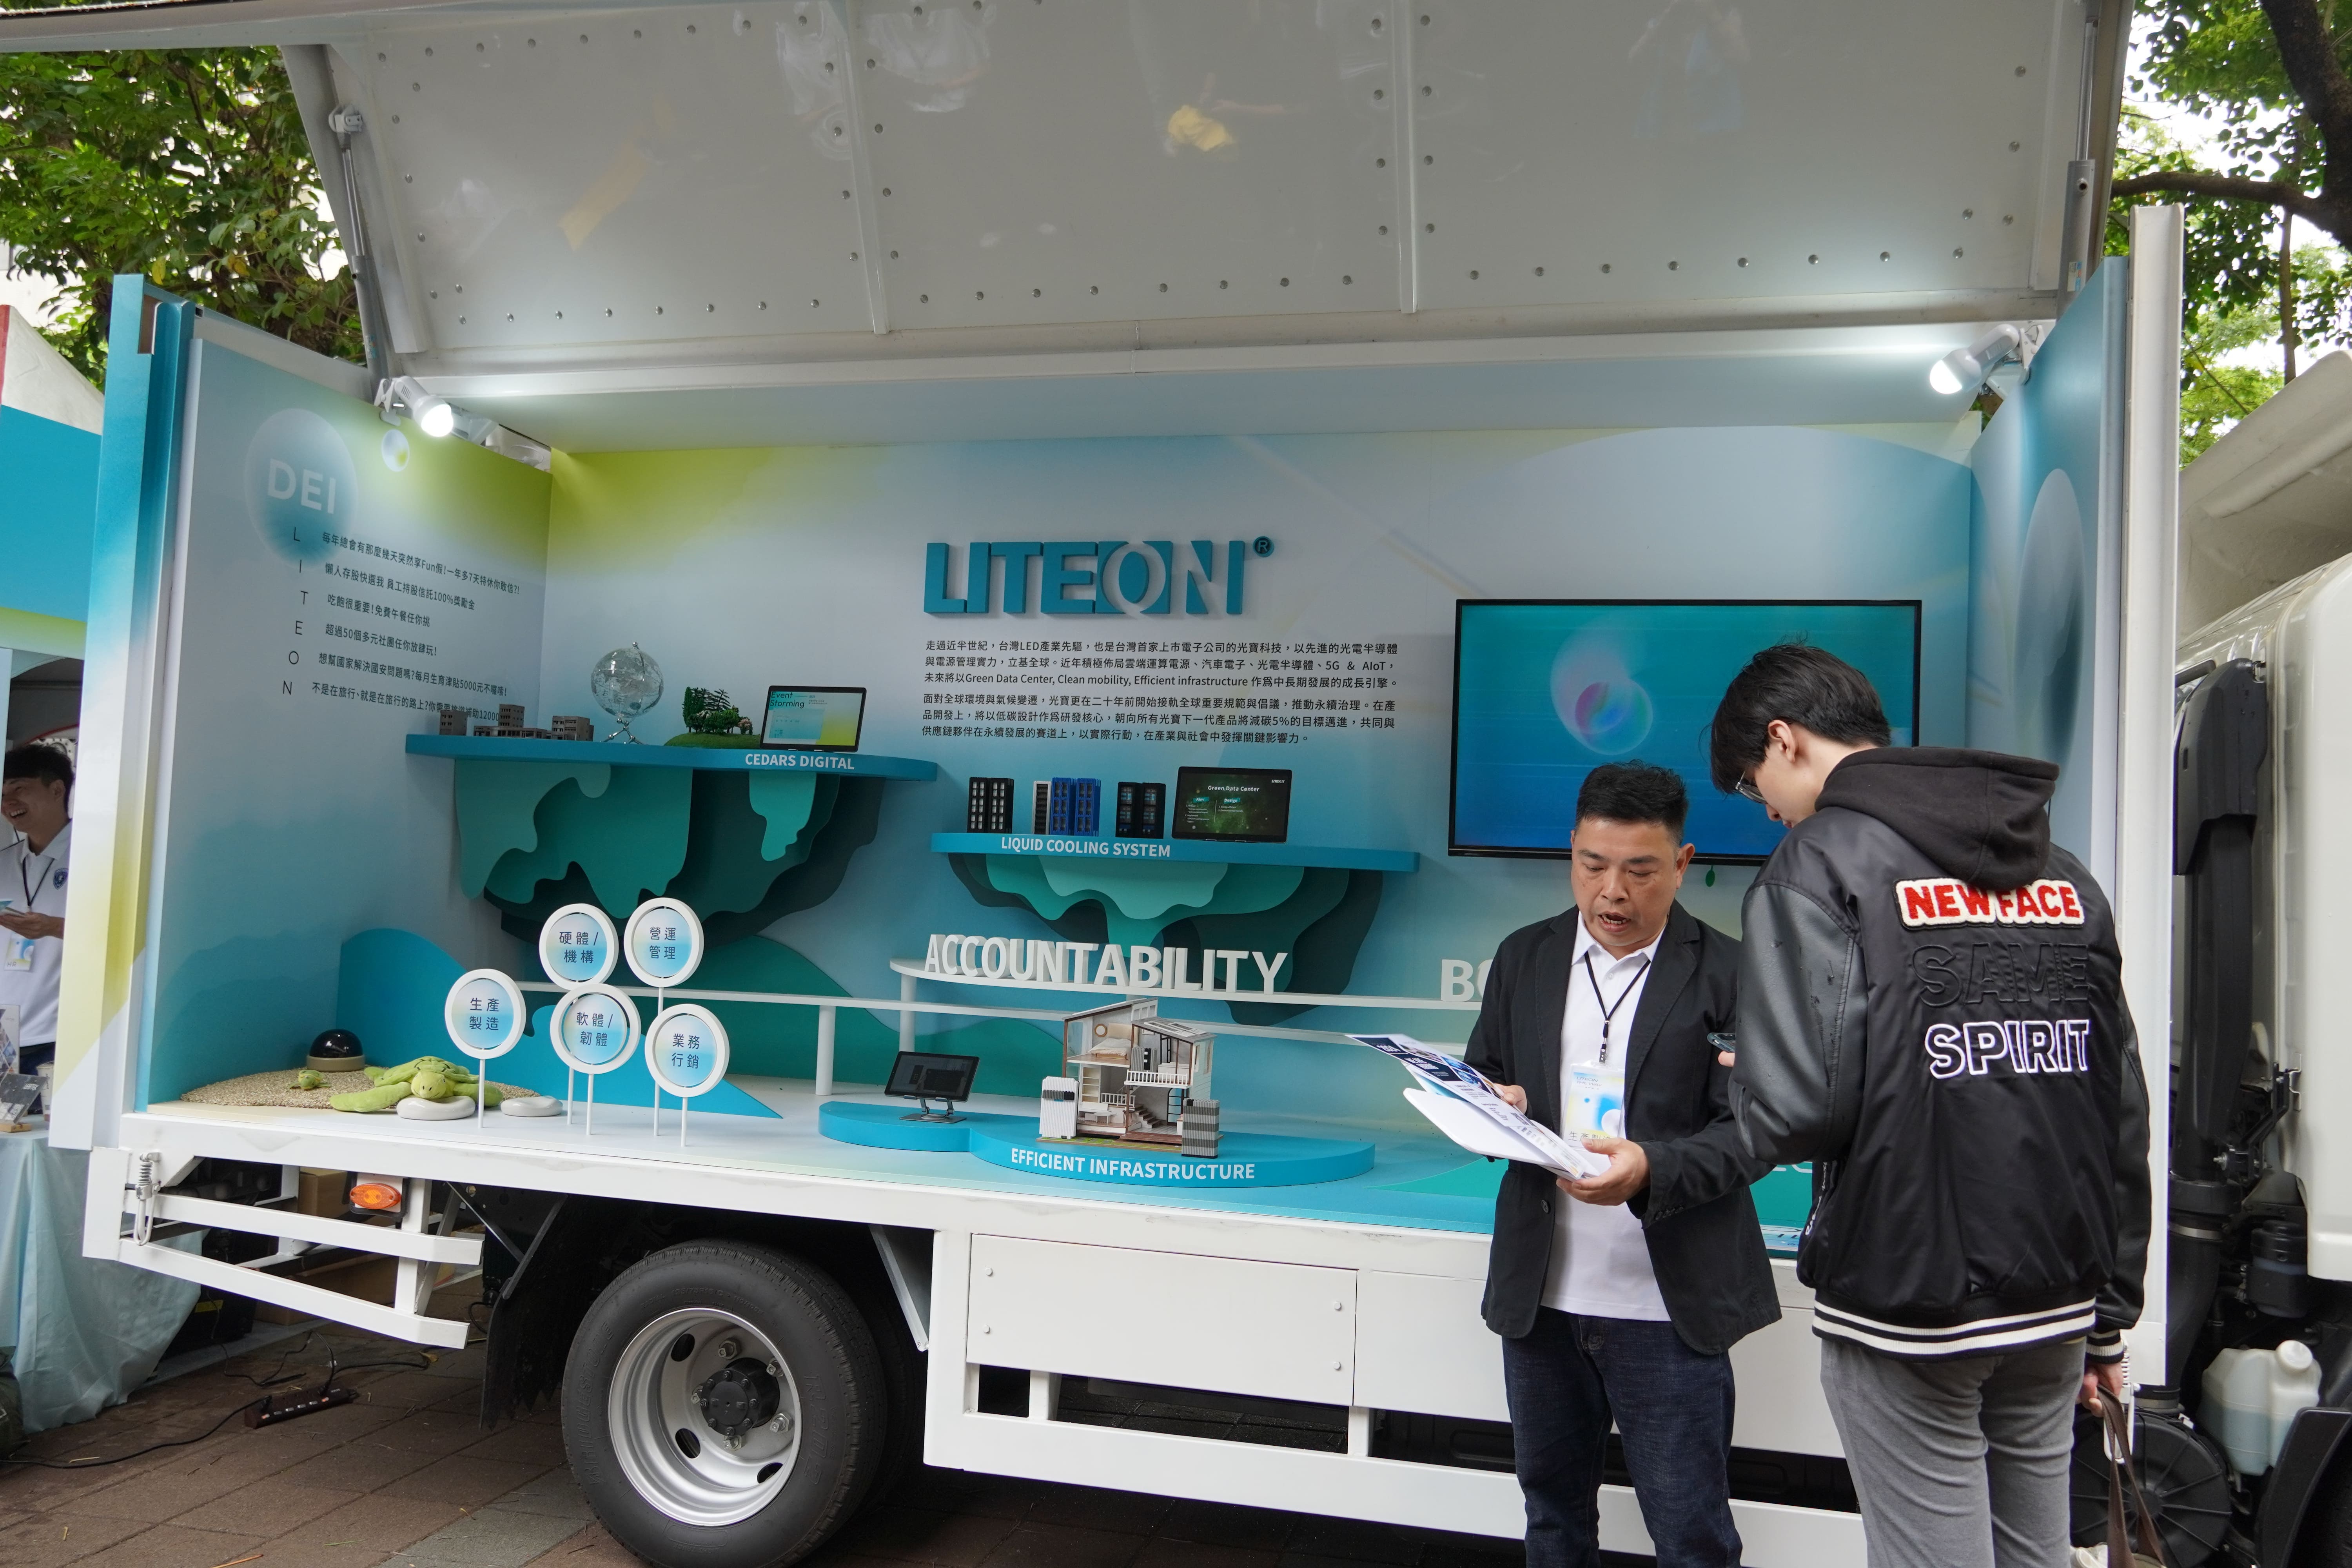 This year, LITE-ON Technology for the first time parked its booth directly next to its branded exhibition vehicle bearing the “LITEON” corporate logo.